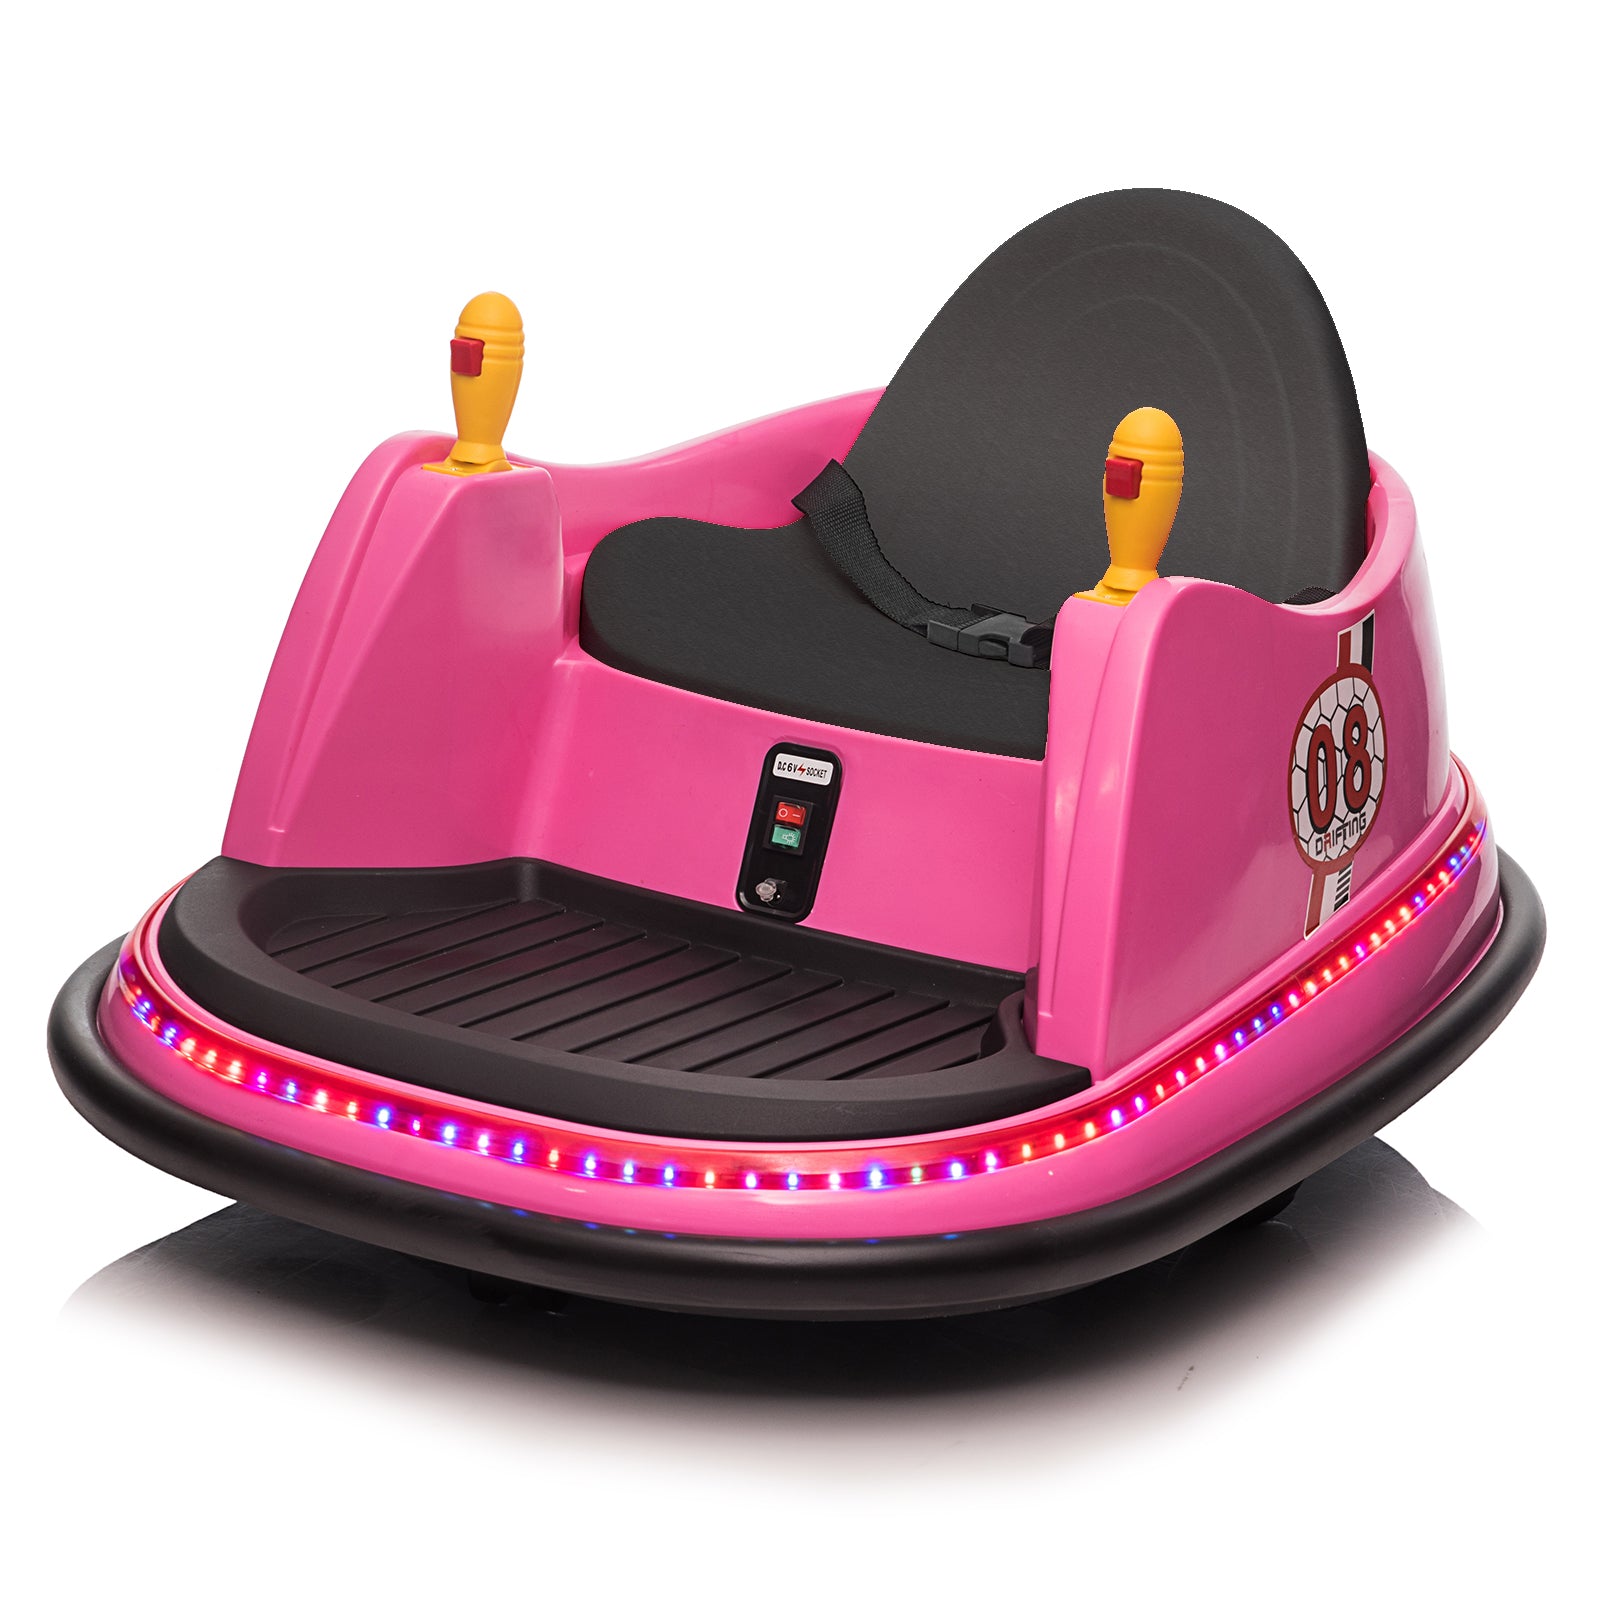 Rev Up the Fun with Our 6V 7A.h Bumper Car - Perfect for Kids and Adults Alike